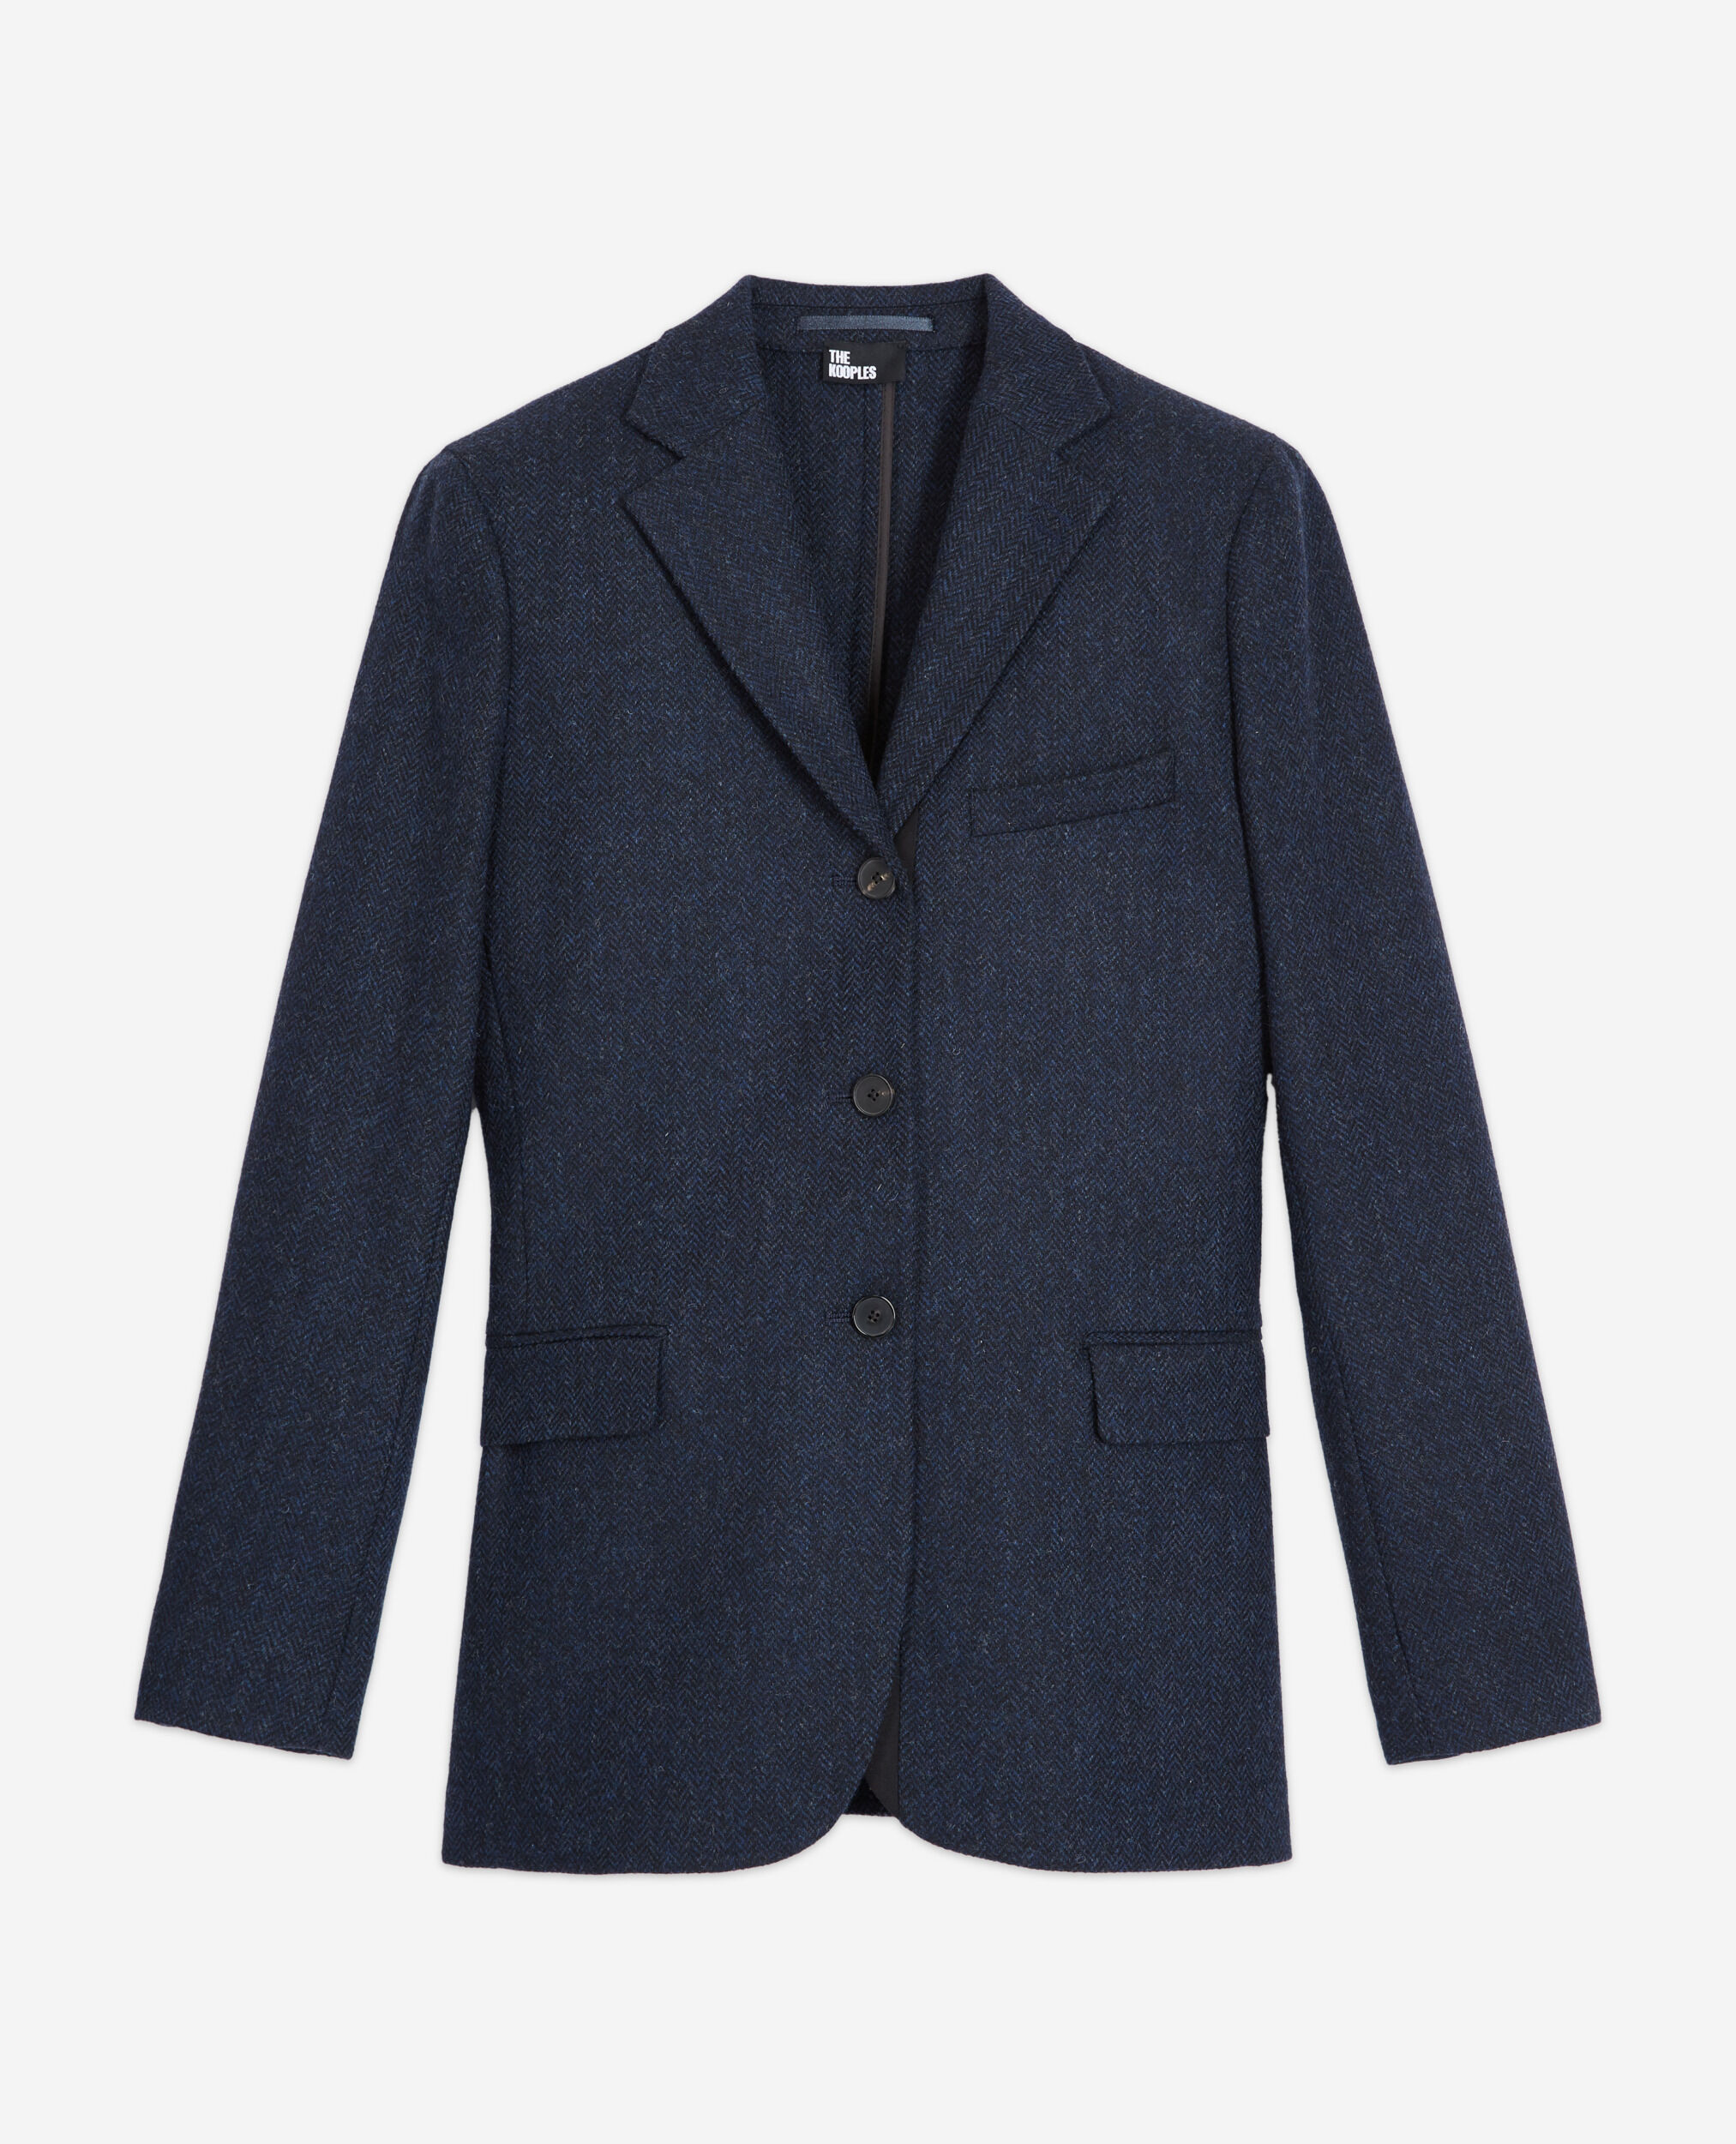 Wool jacket with blue motif, NAVY, hi-res image number null